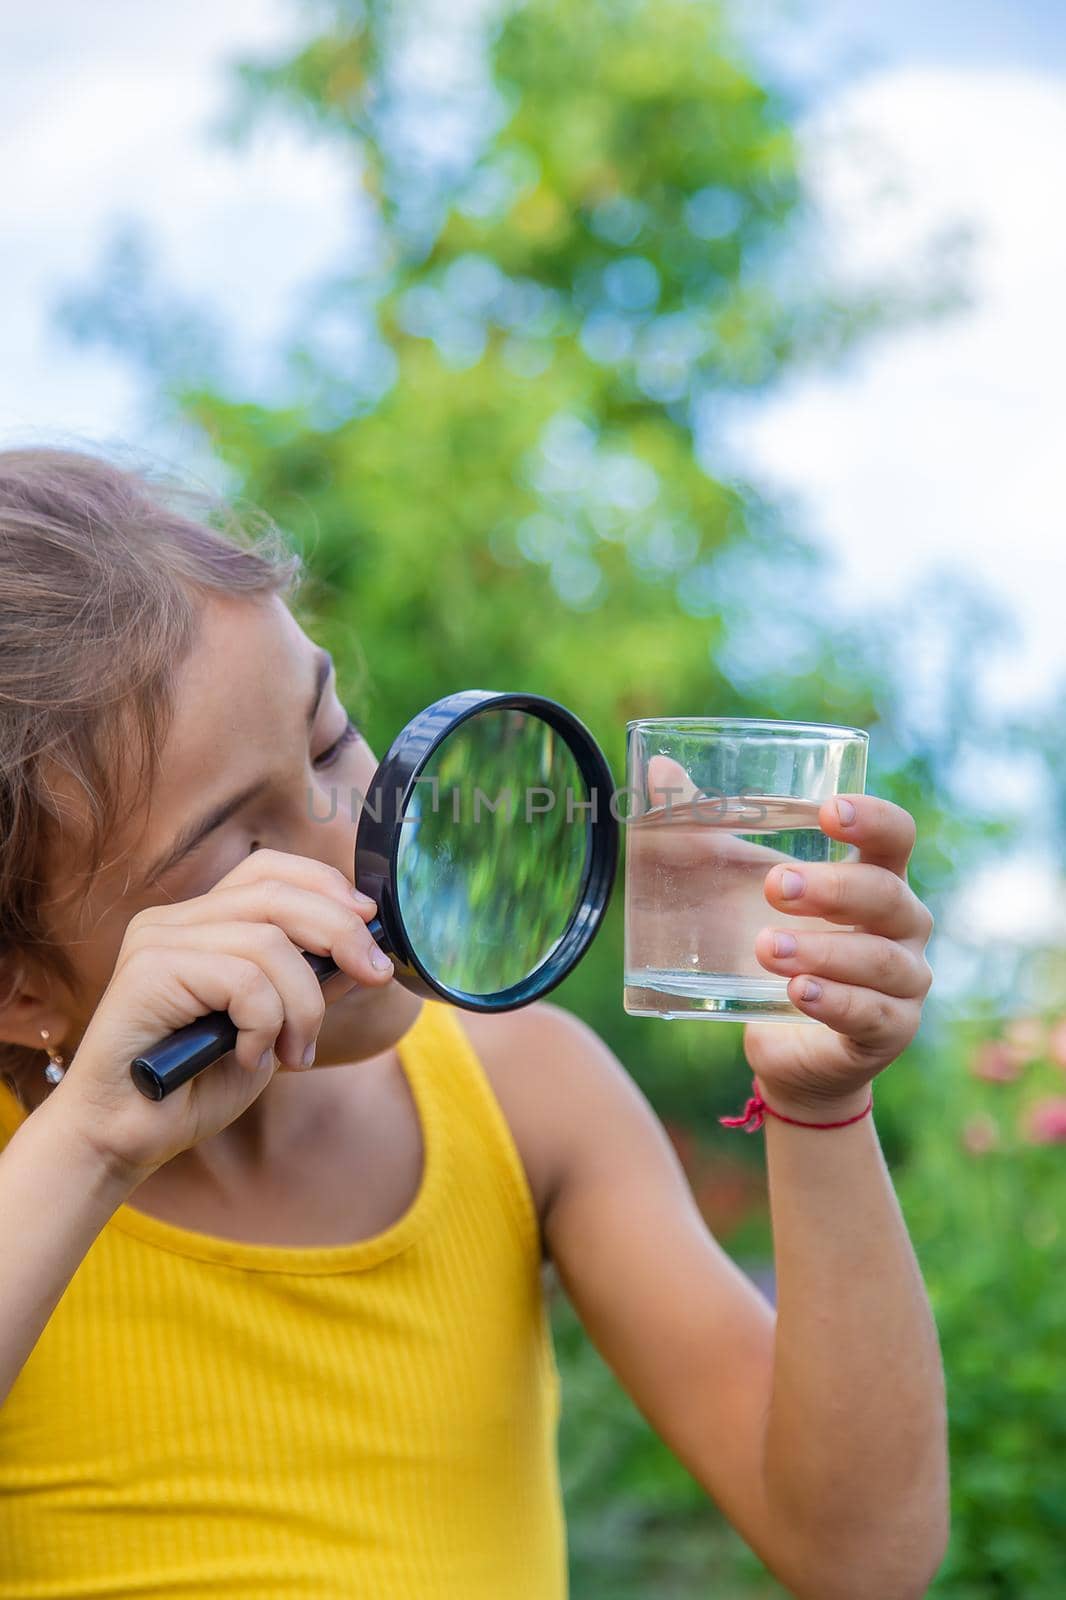 The child examines a glass of water with a magnifying glass. Selective focus. by yanadjana